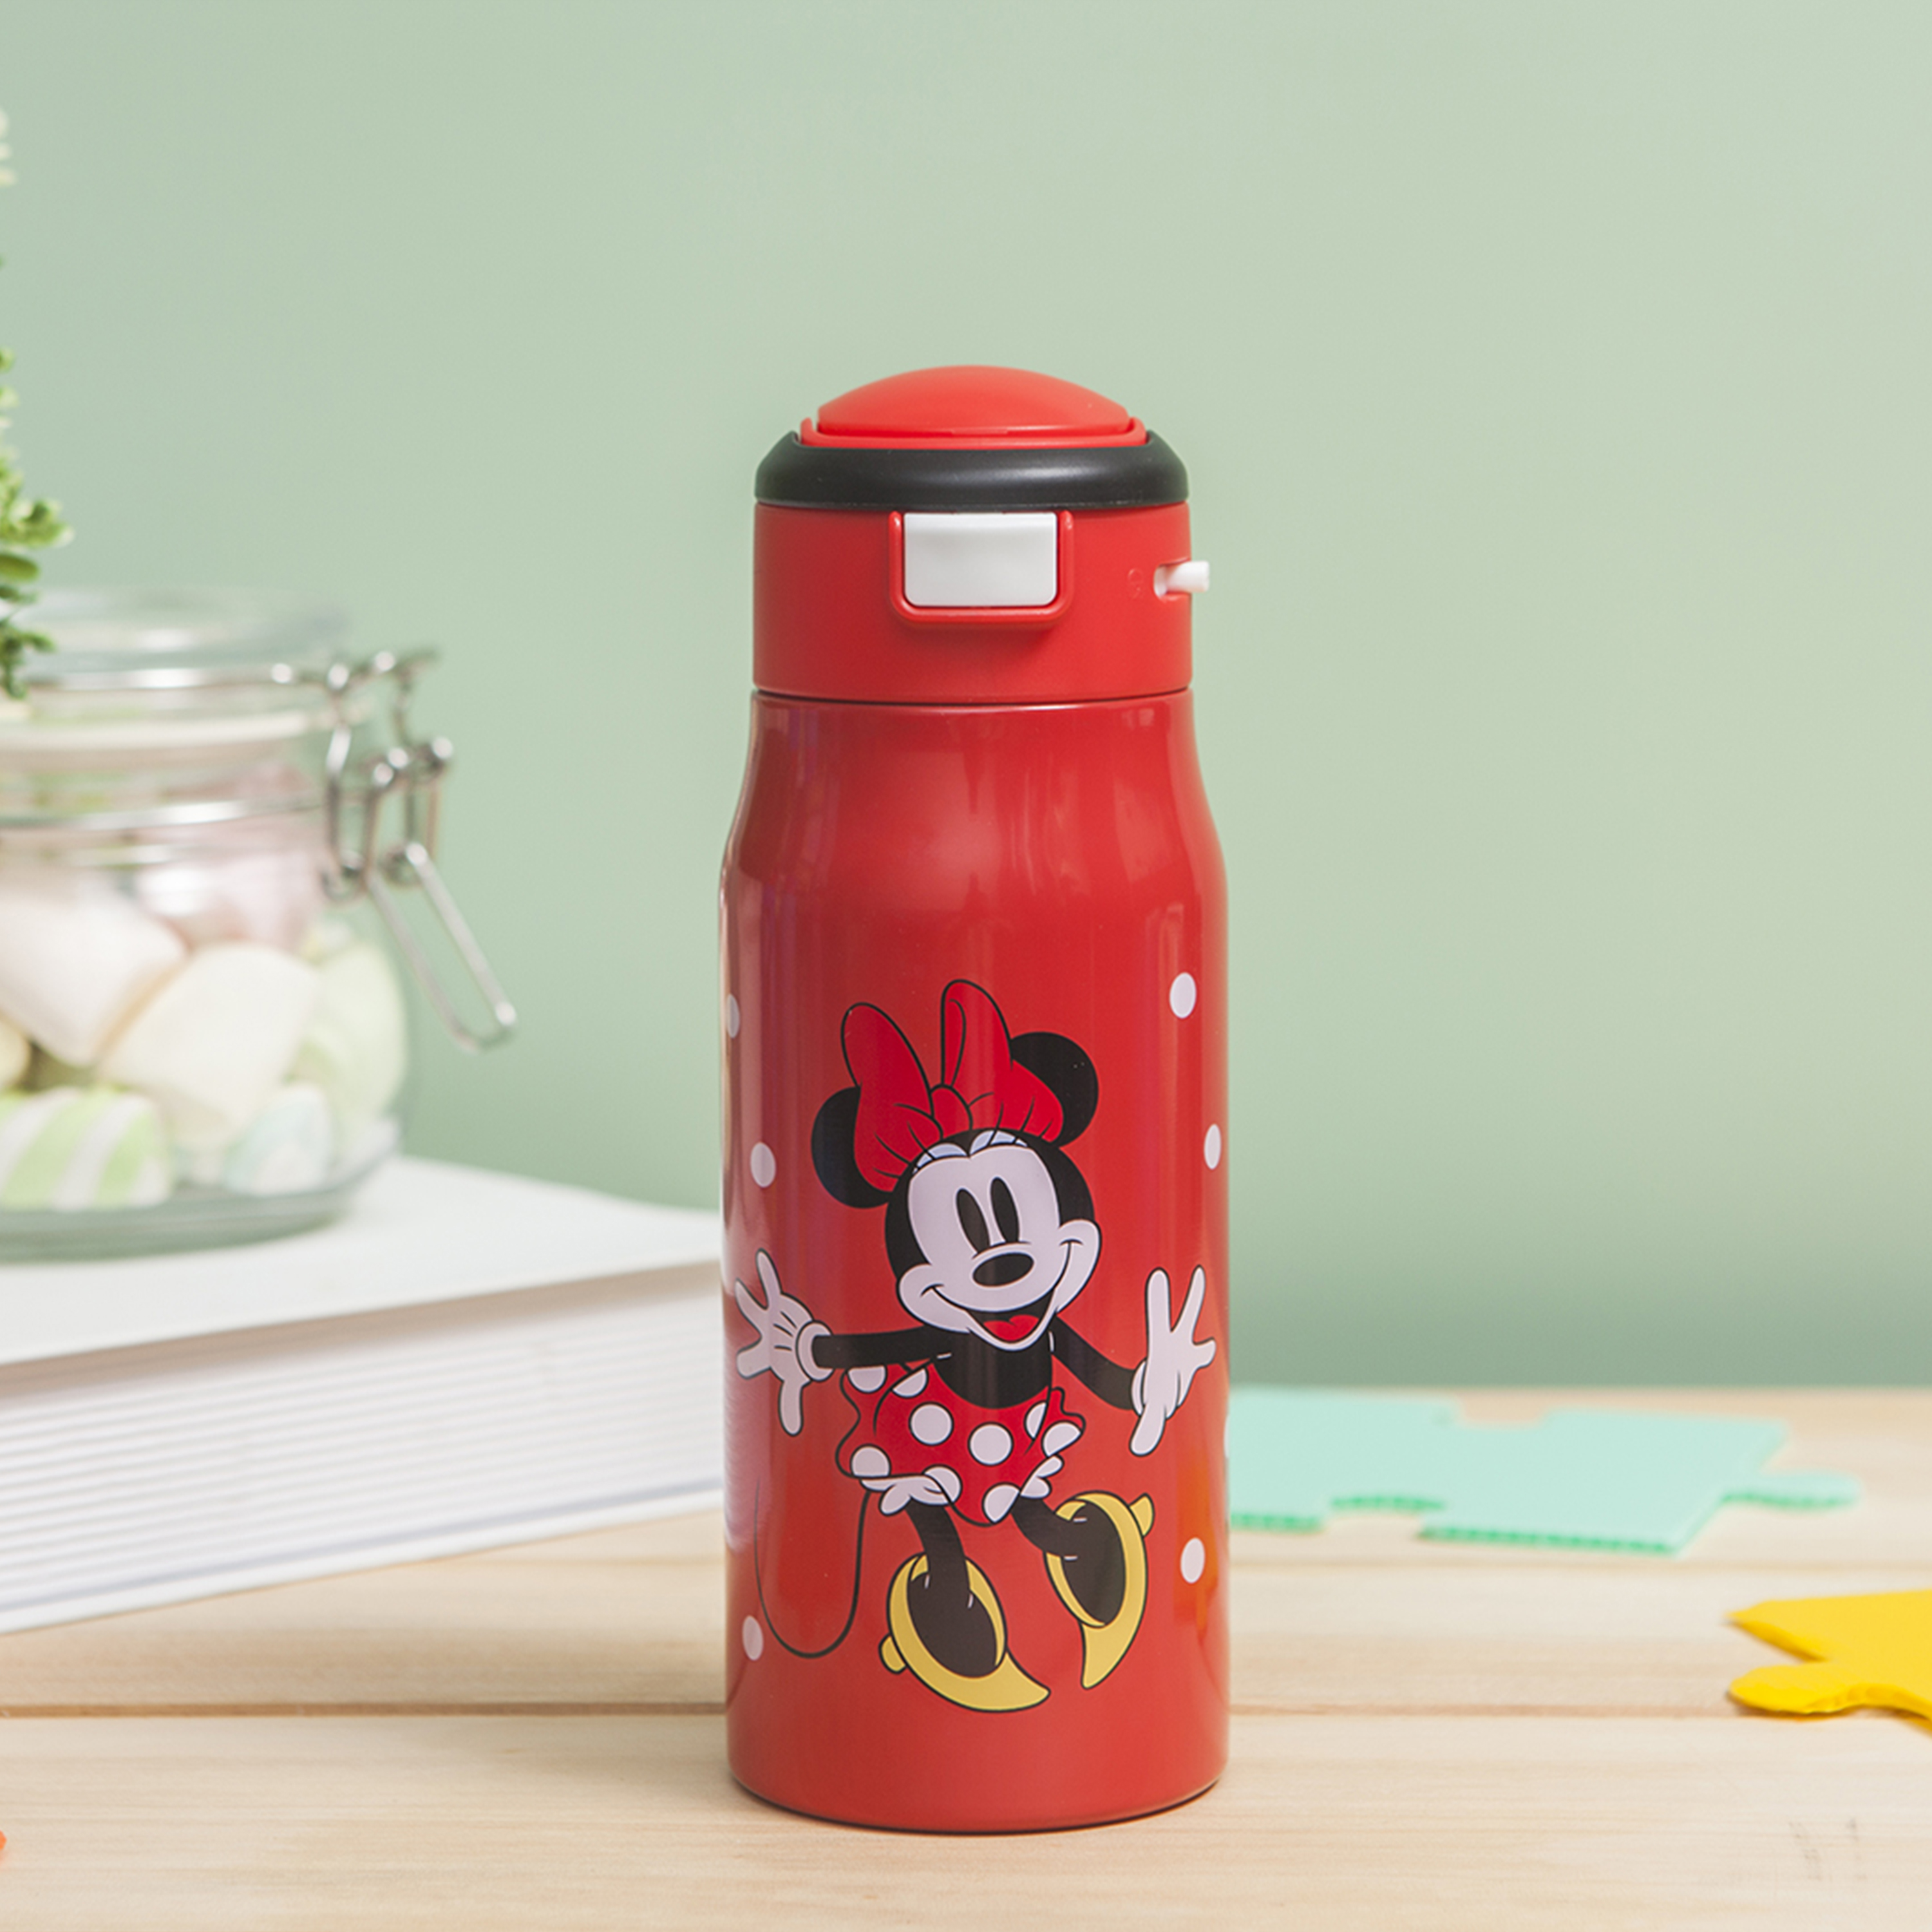 Disney 13.5 ounce Mesa Double Wall Insulated Stainless Steel Water Bottle, Minnie Mouse slideshow image 5